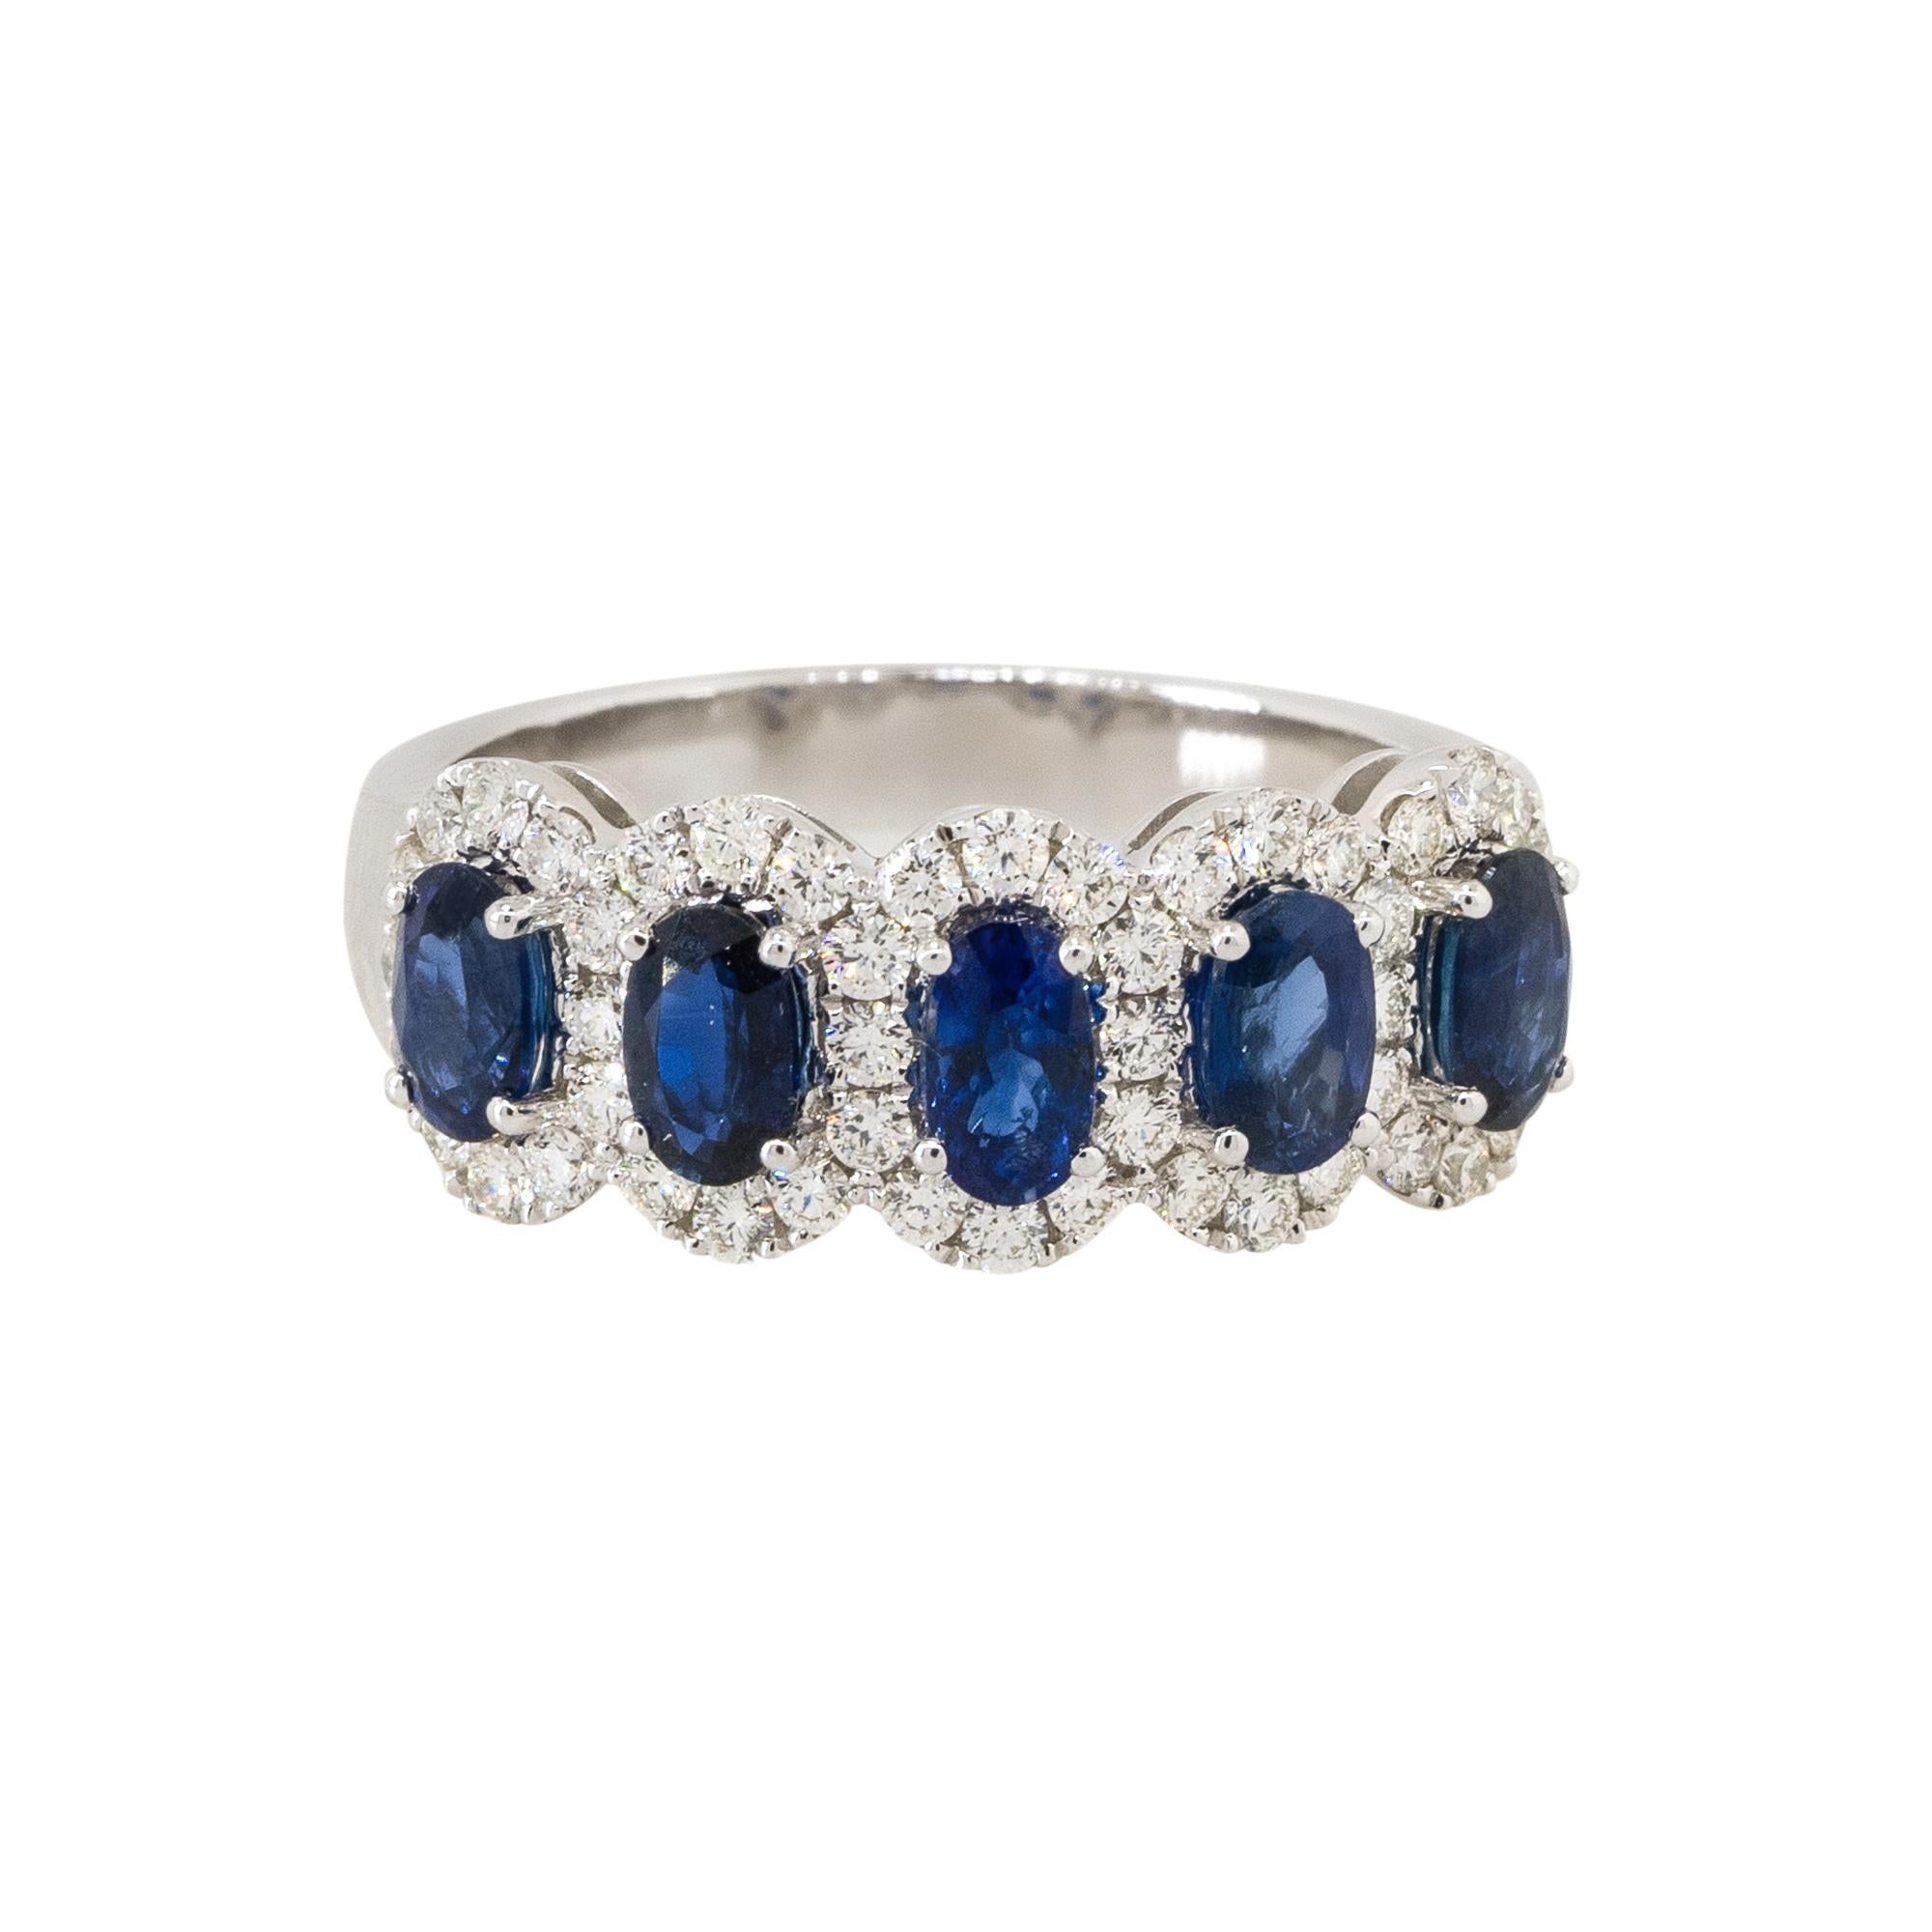 Material: 14k White Gold
Diamond Details: Approx. 0.57ctw of round cut Diamonds. Diamonds are G/H in color and VS in clarity
Gemstone Details: Approx 1.77ctw of oval cut Sapphire gemstones. 5 stones total
Ring Size: 6.25 
Total Weight: 5.3g